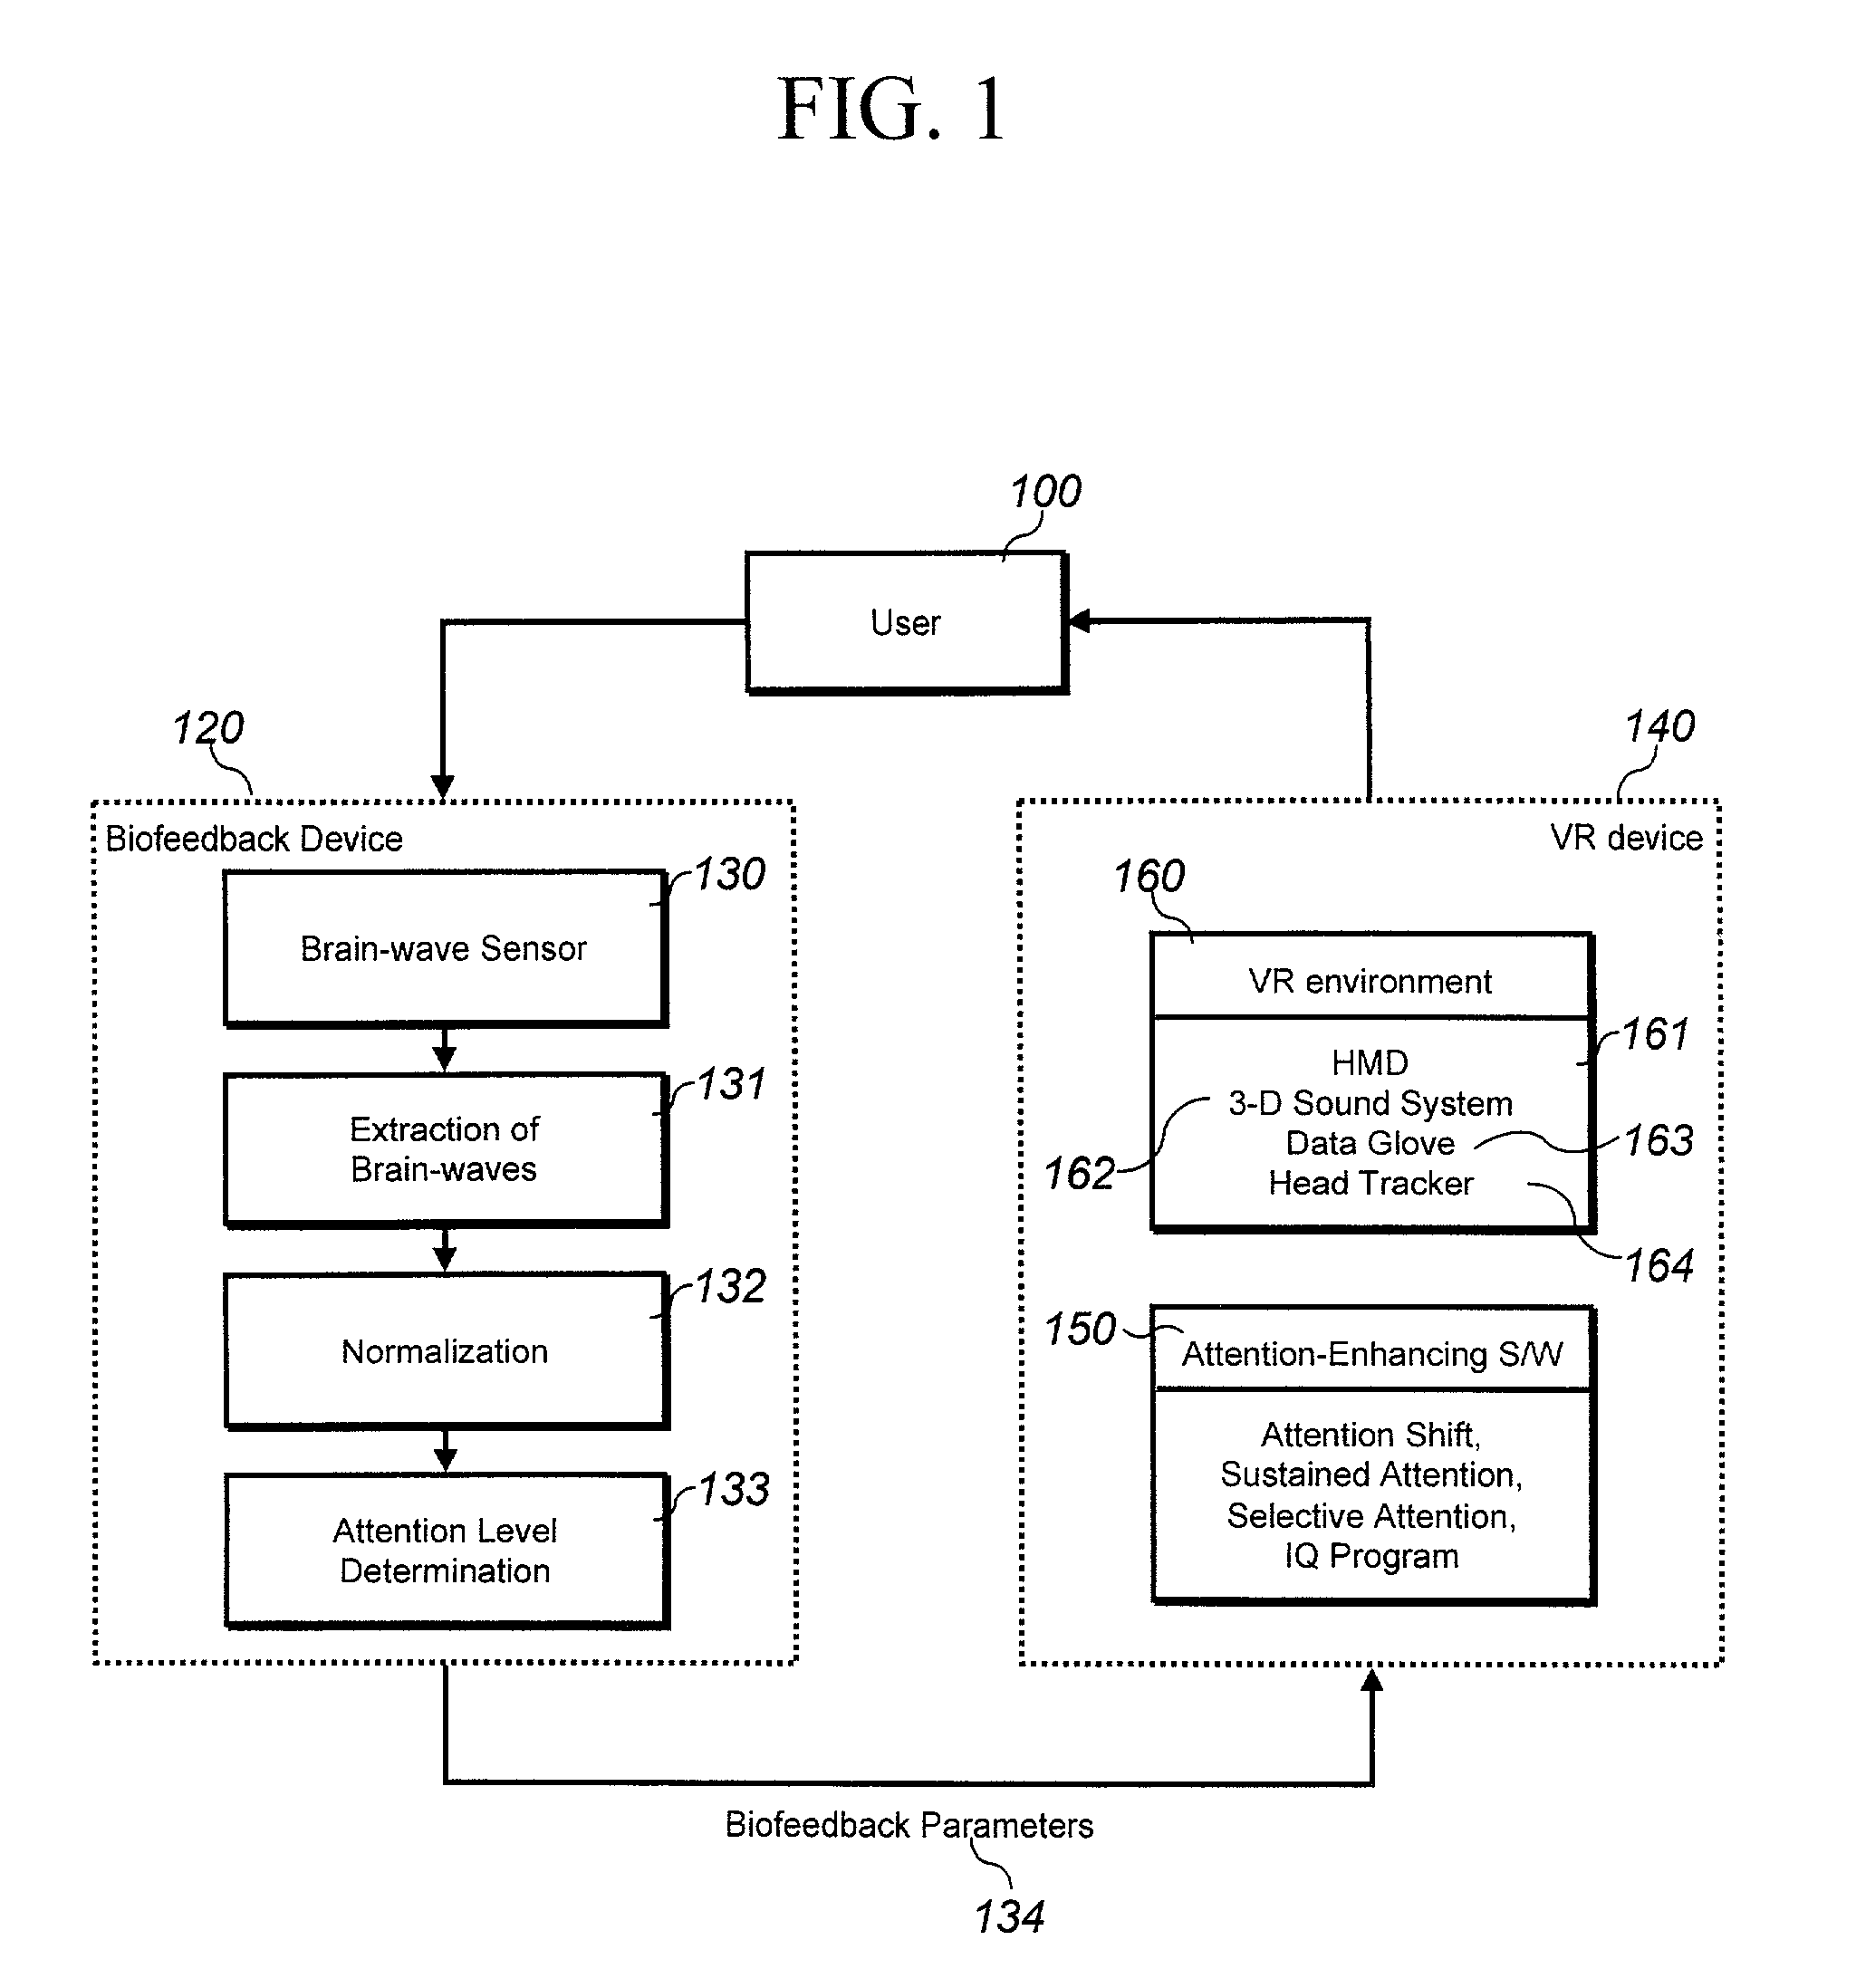 System and method of correlating virtual reality with biofeedback for enhancing attention